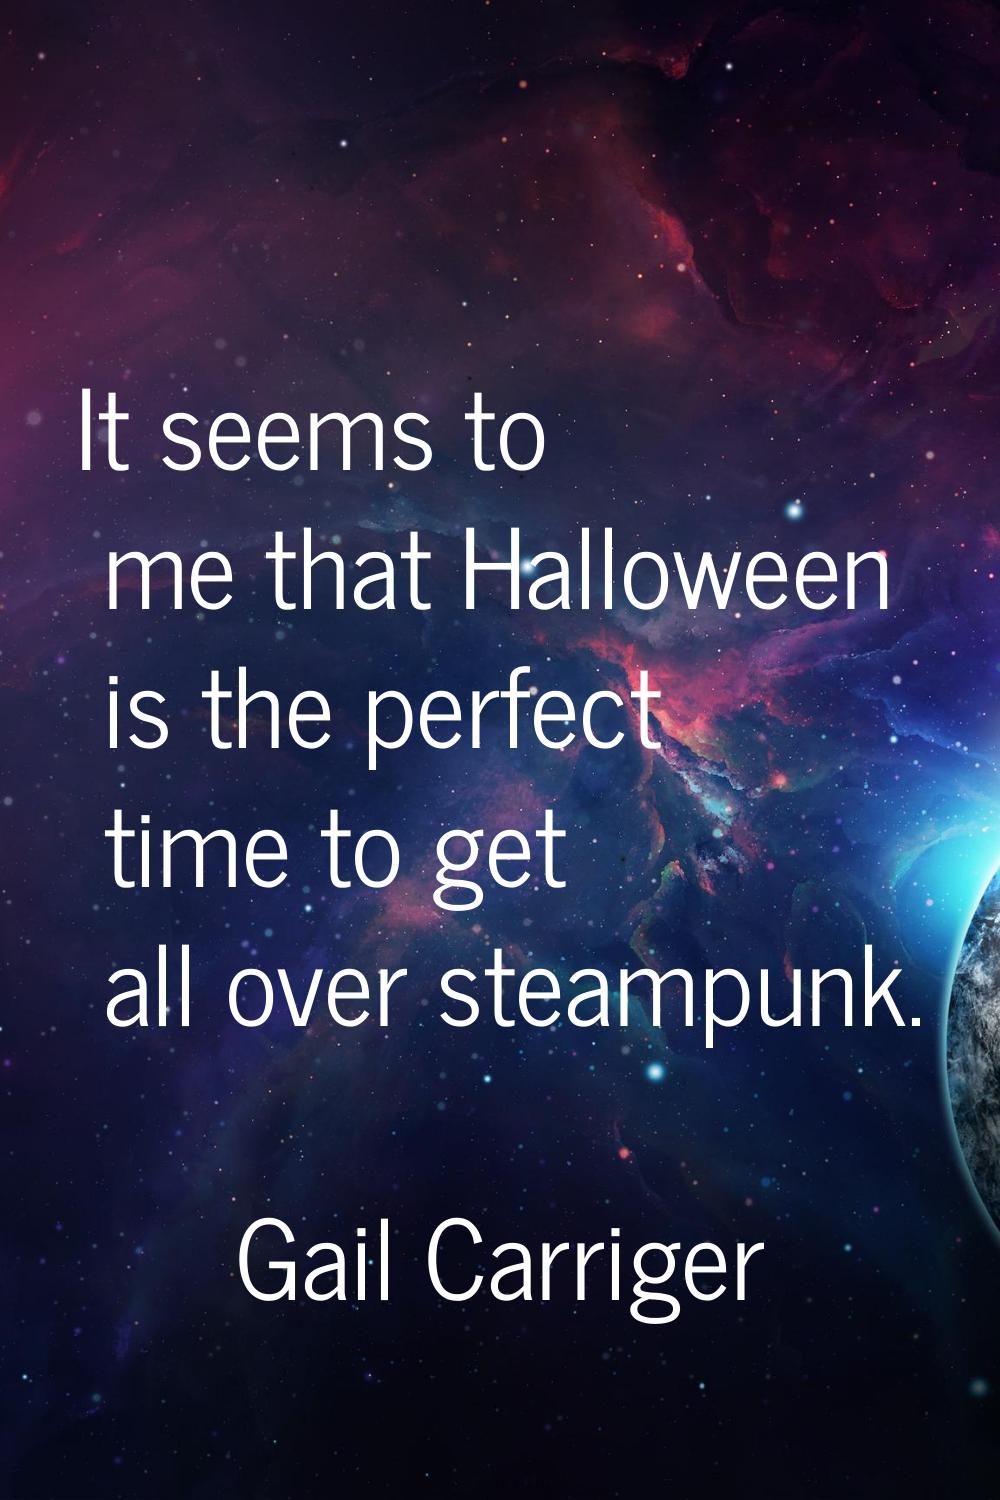 It seems to me that Halloween is the perfect time to get all over steampunk.